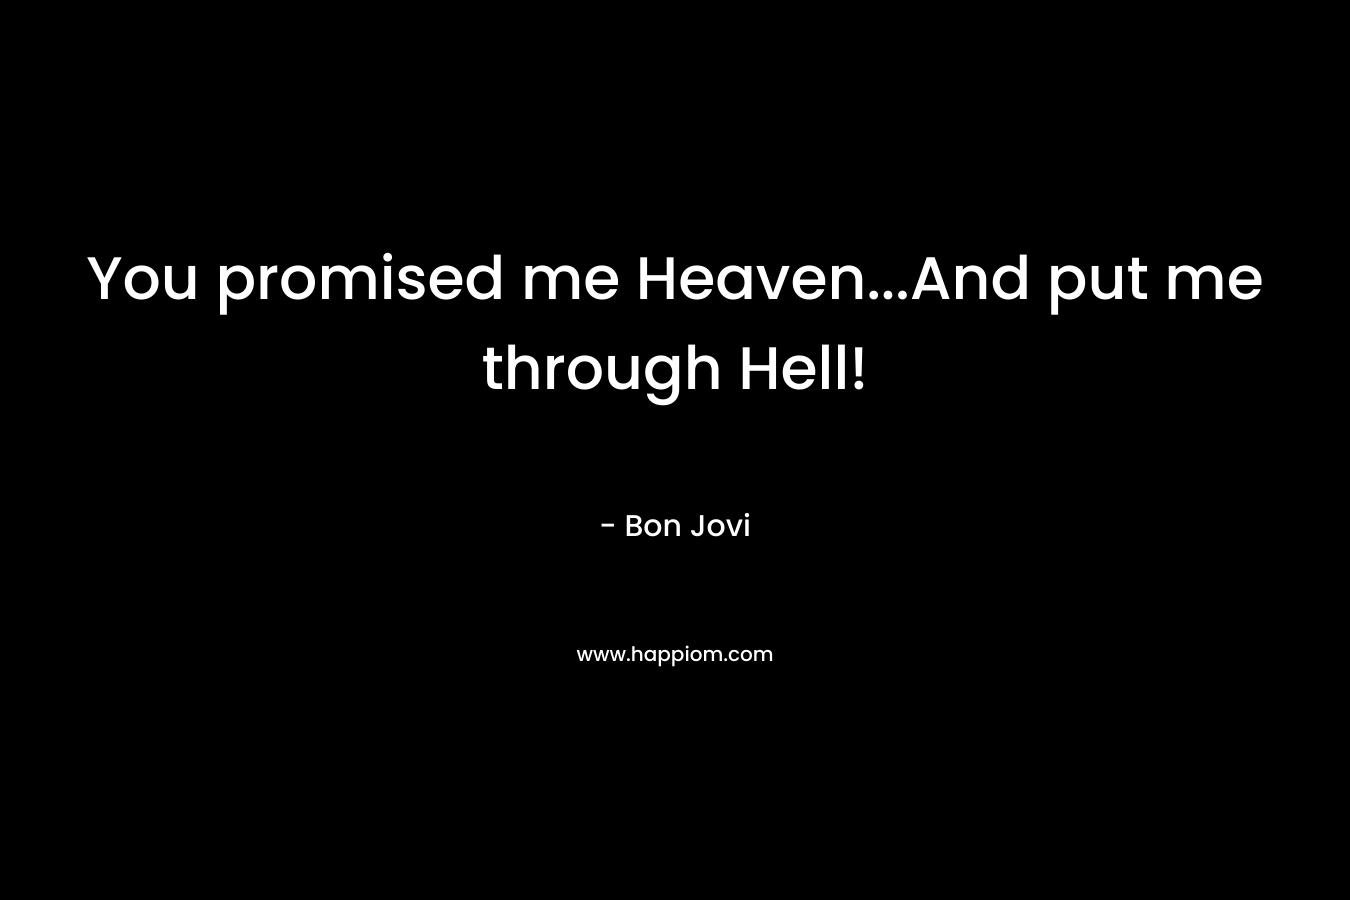 You promised me Heaven...And put me through Hell!